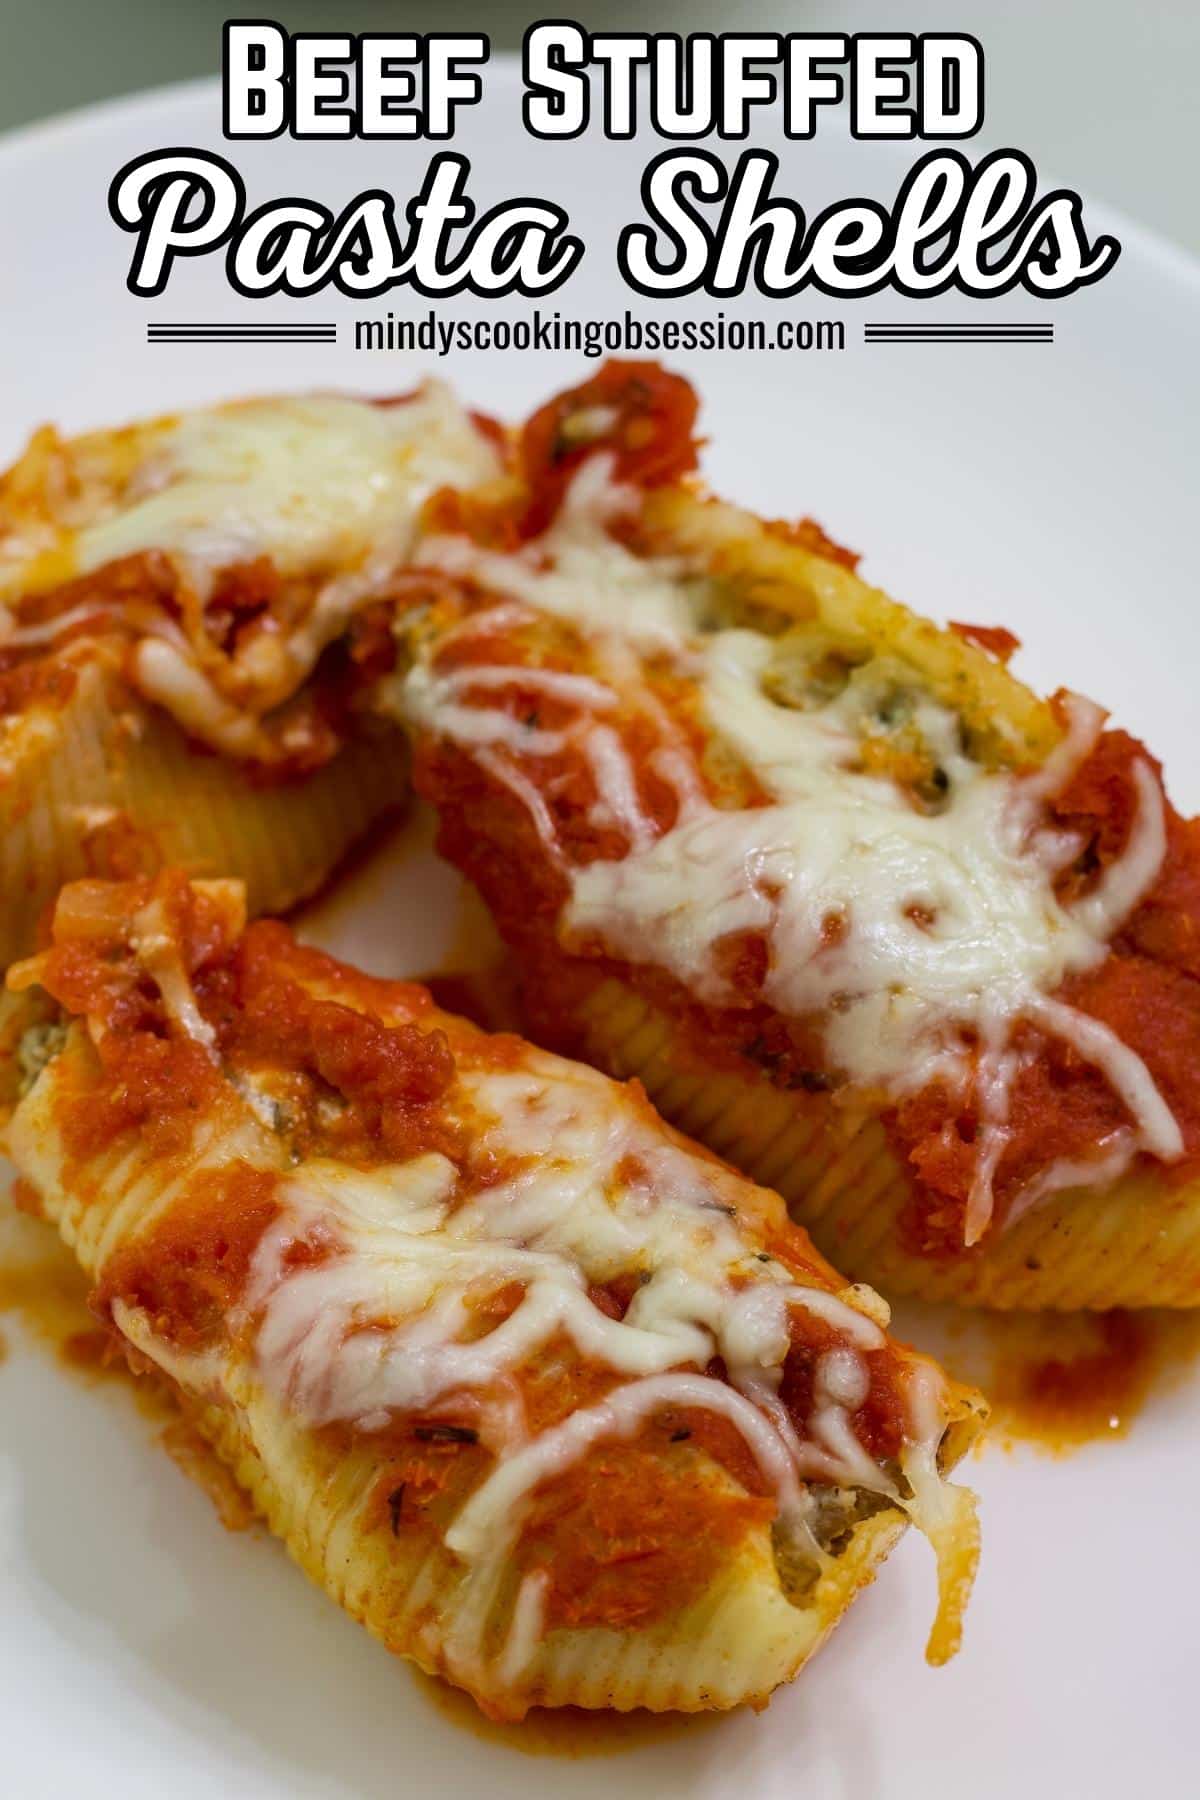 The Best Ground Beef Stuffed Pasta Shells Recipe is a comfort food classic using three types of cheese and made super easy using jar sauce.  via @mindyscookingobsession